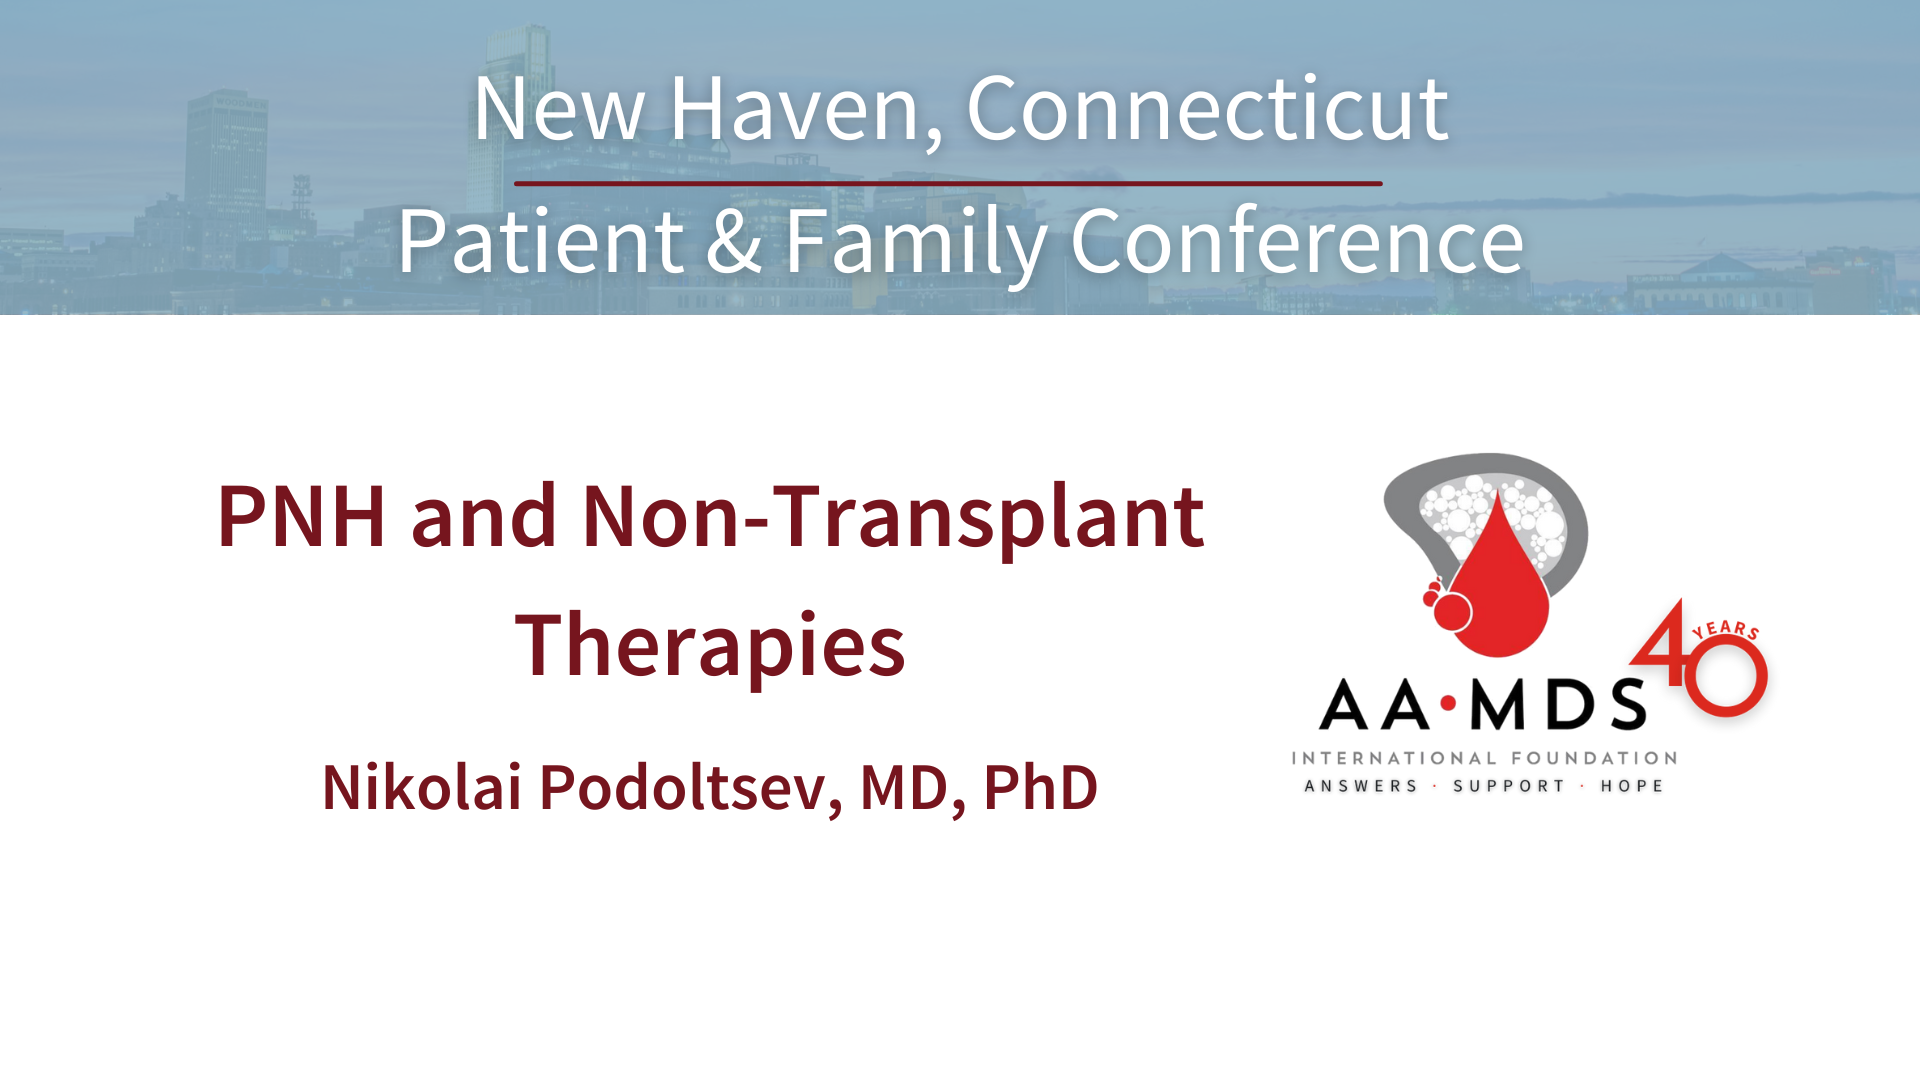 P-N-H and Non-Transplant Therapies